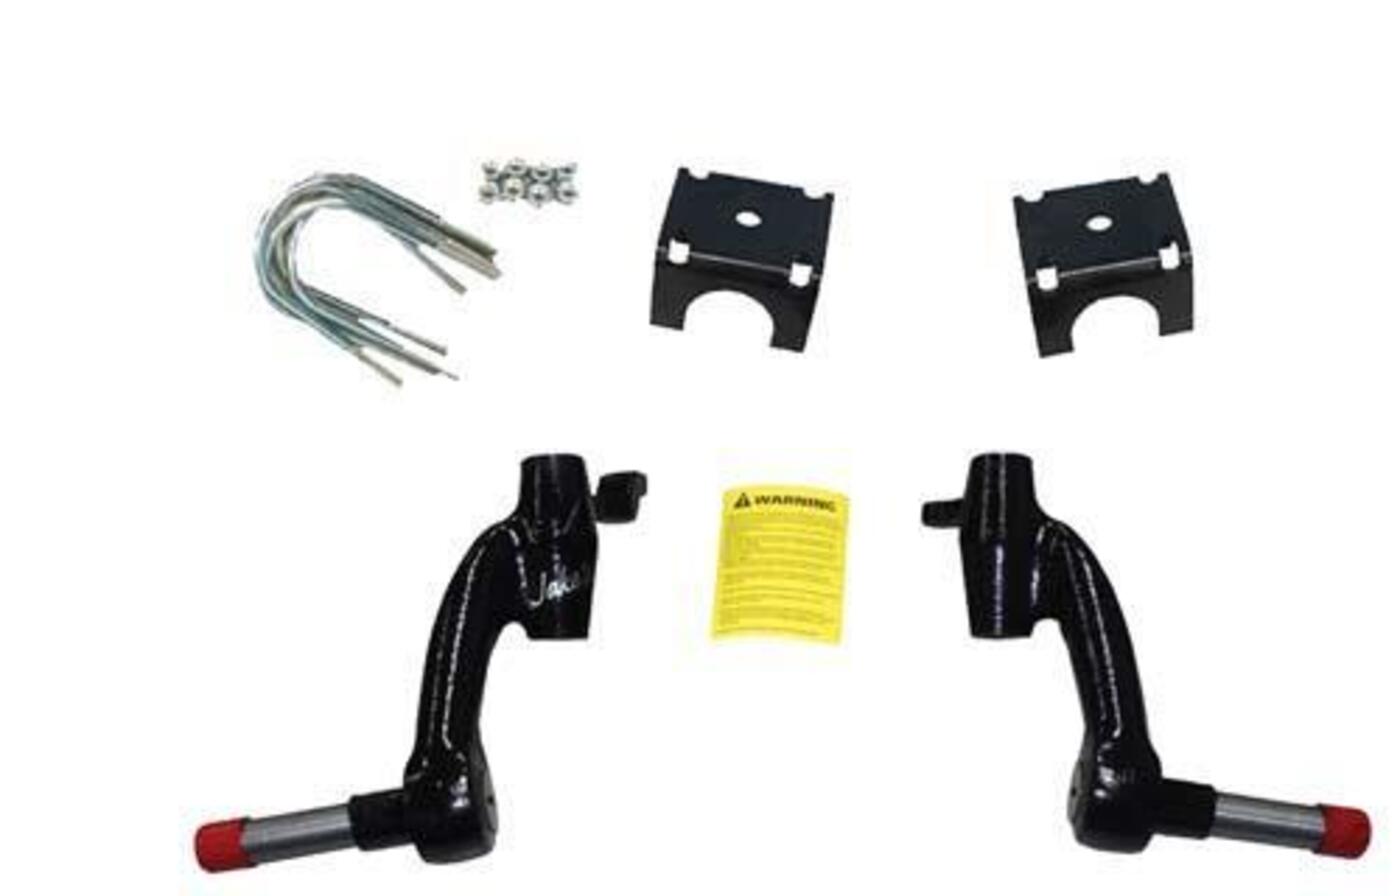 Jake's 6" E-Z-GO TXT Gas Spindle Lift Kit Years 2001 - 2009